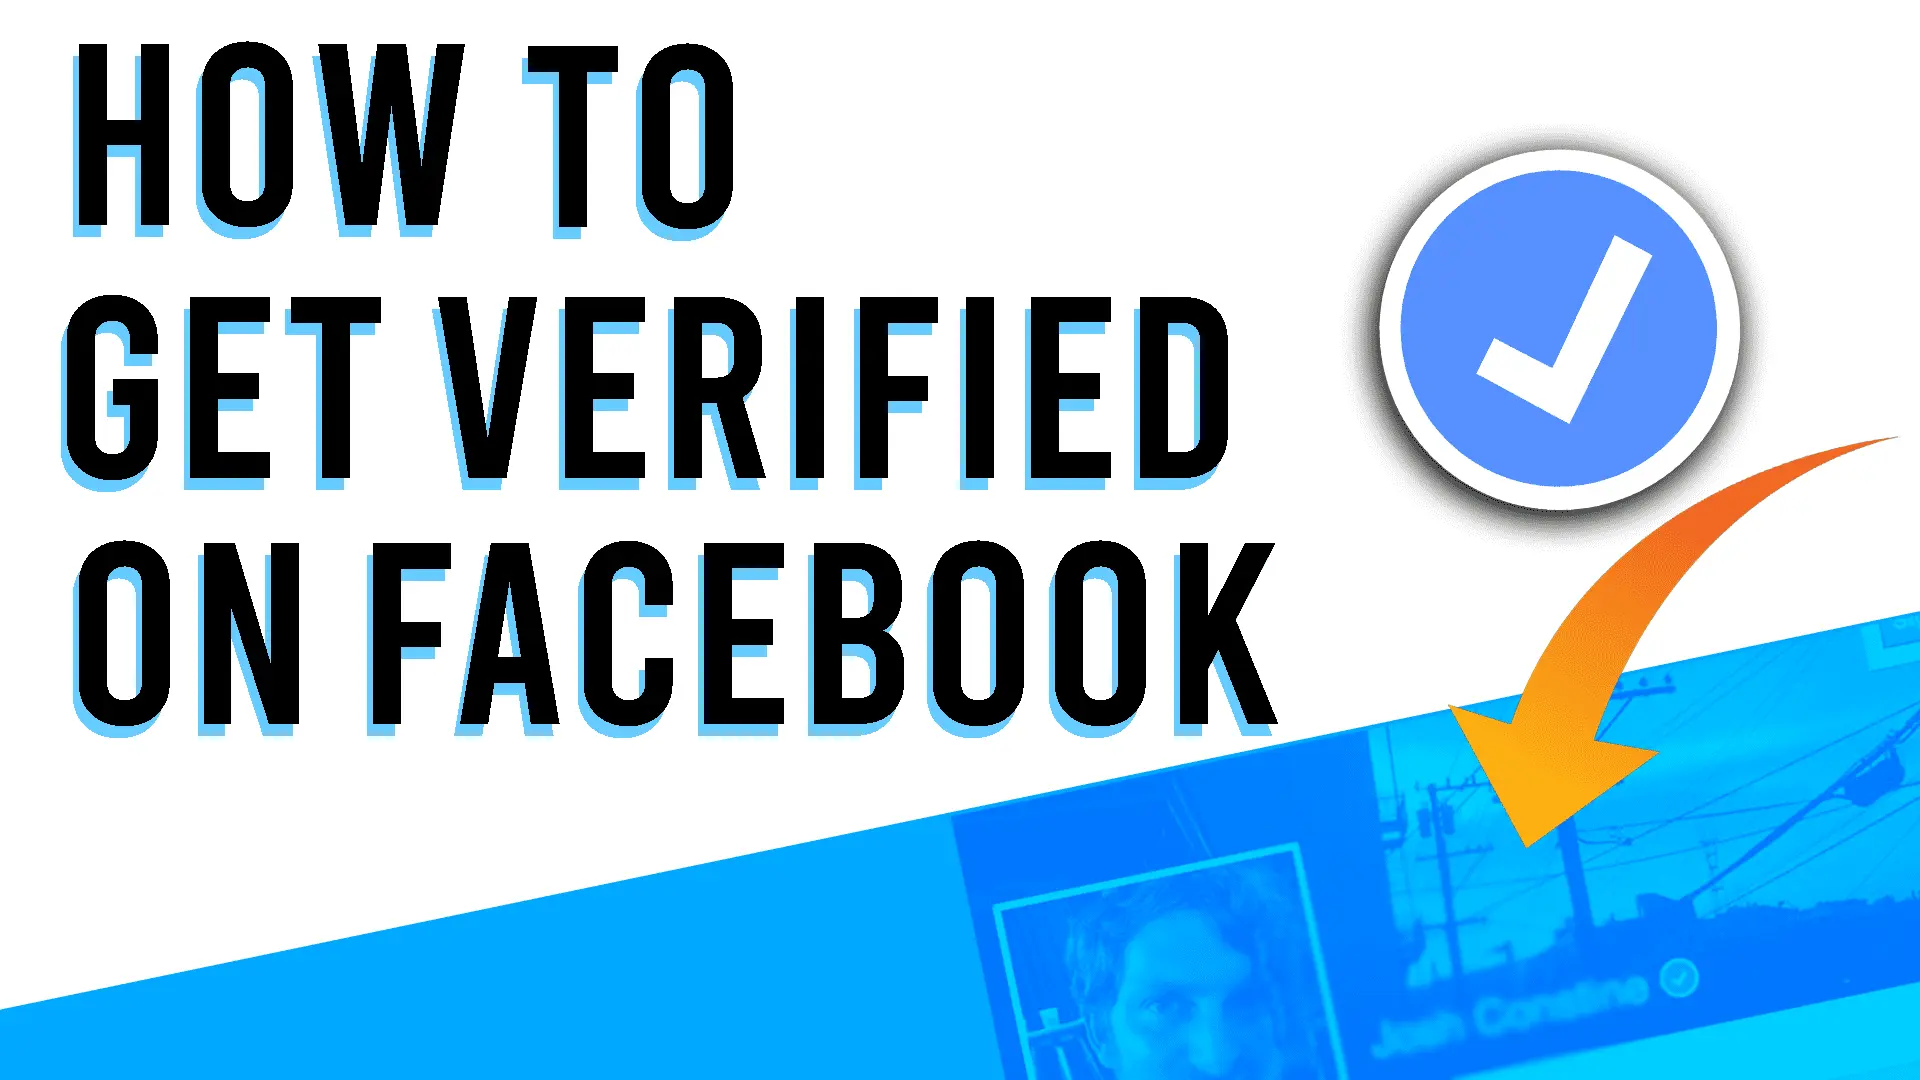 How to Get Verified On Facebook